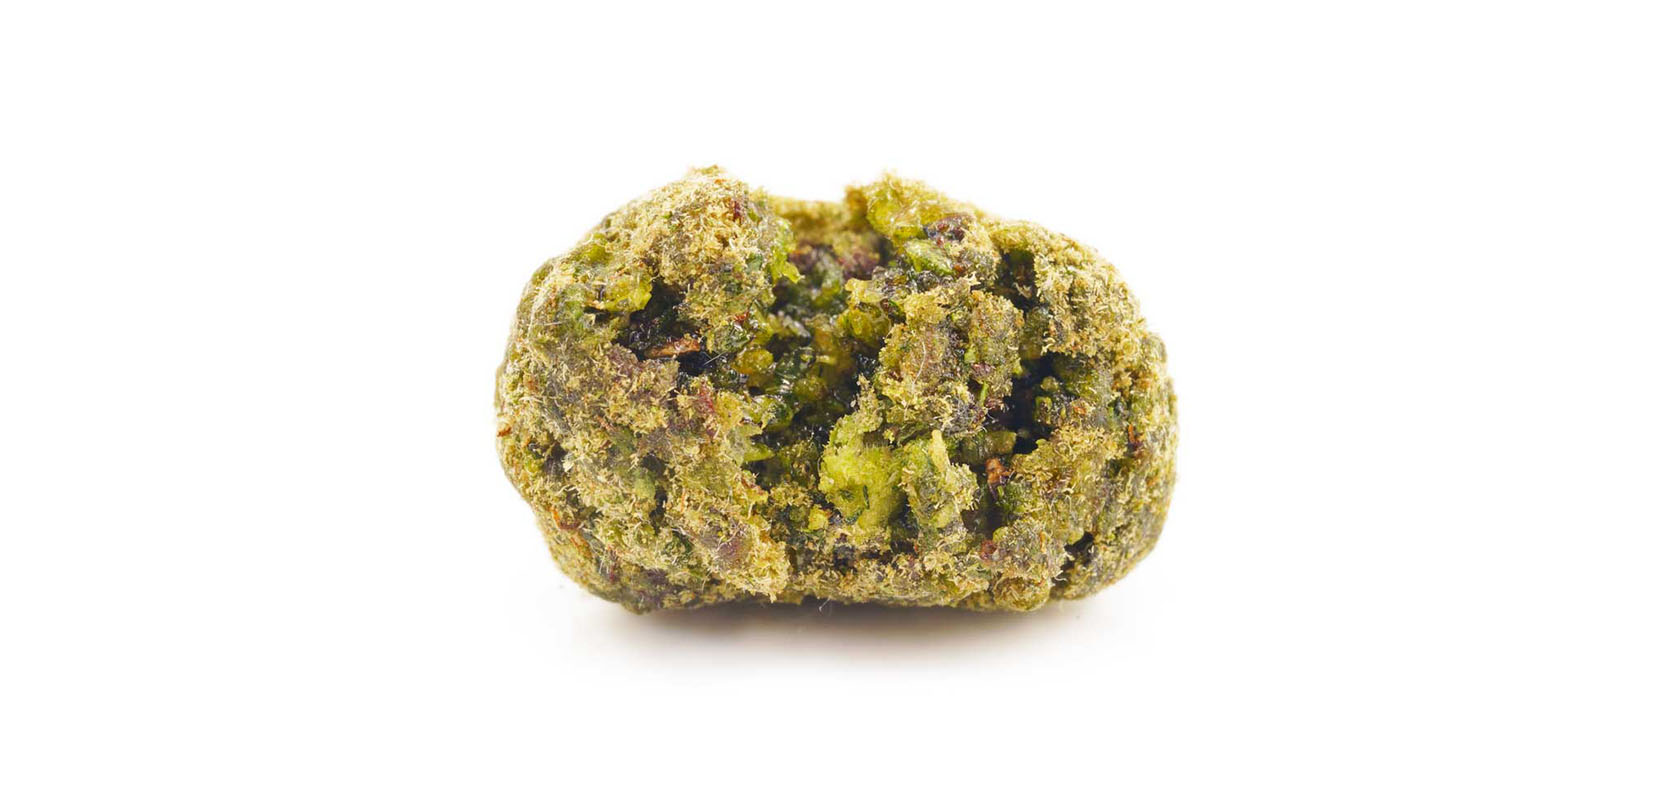 Potent moon rock weed at Low Price Bud dispensary for BC cannabis and weed online Canada. Buy weed. budget buds and cheapweed.